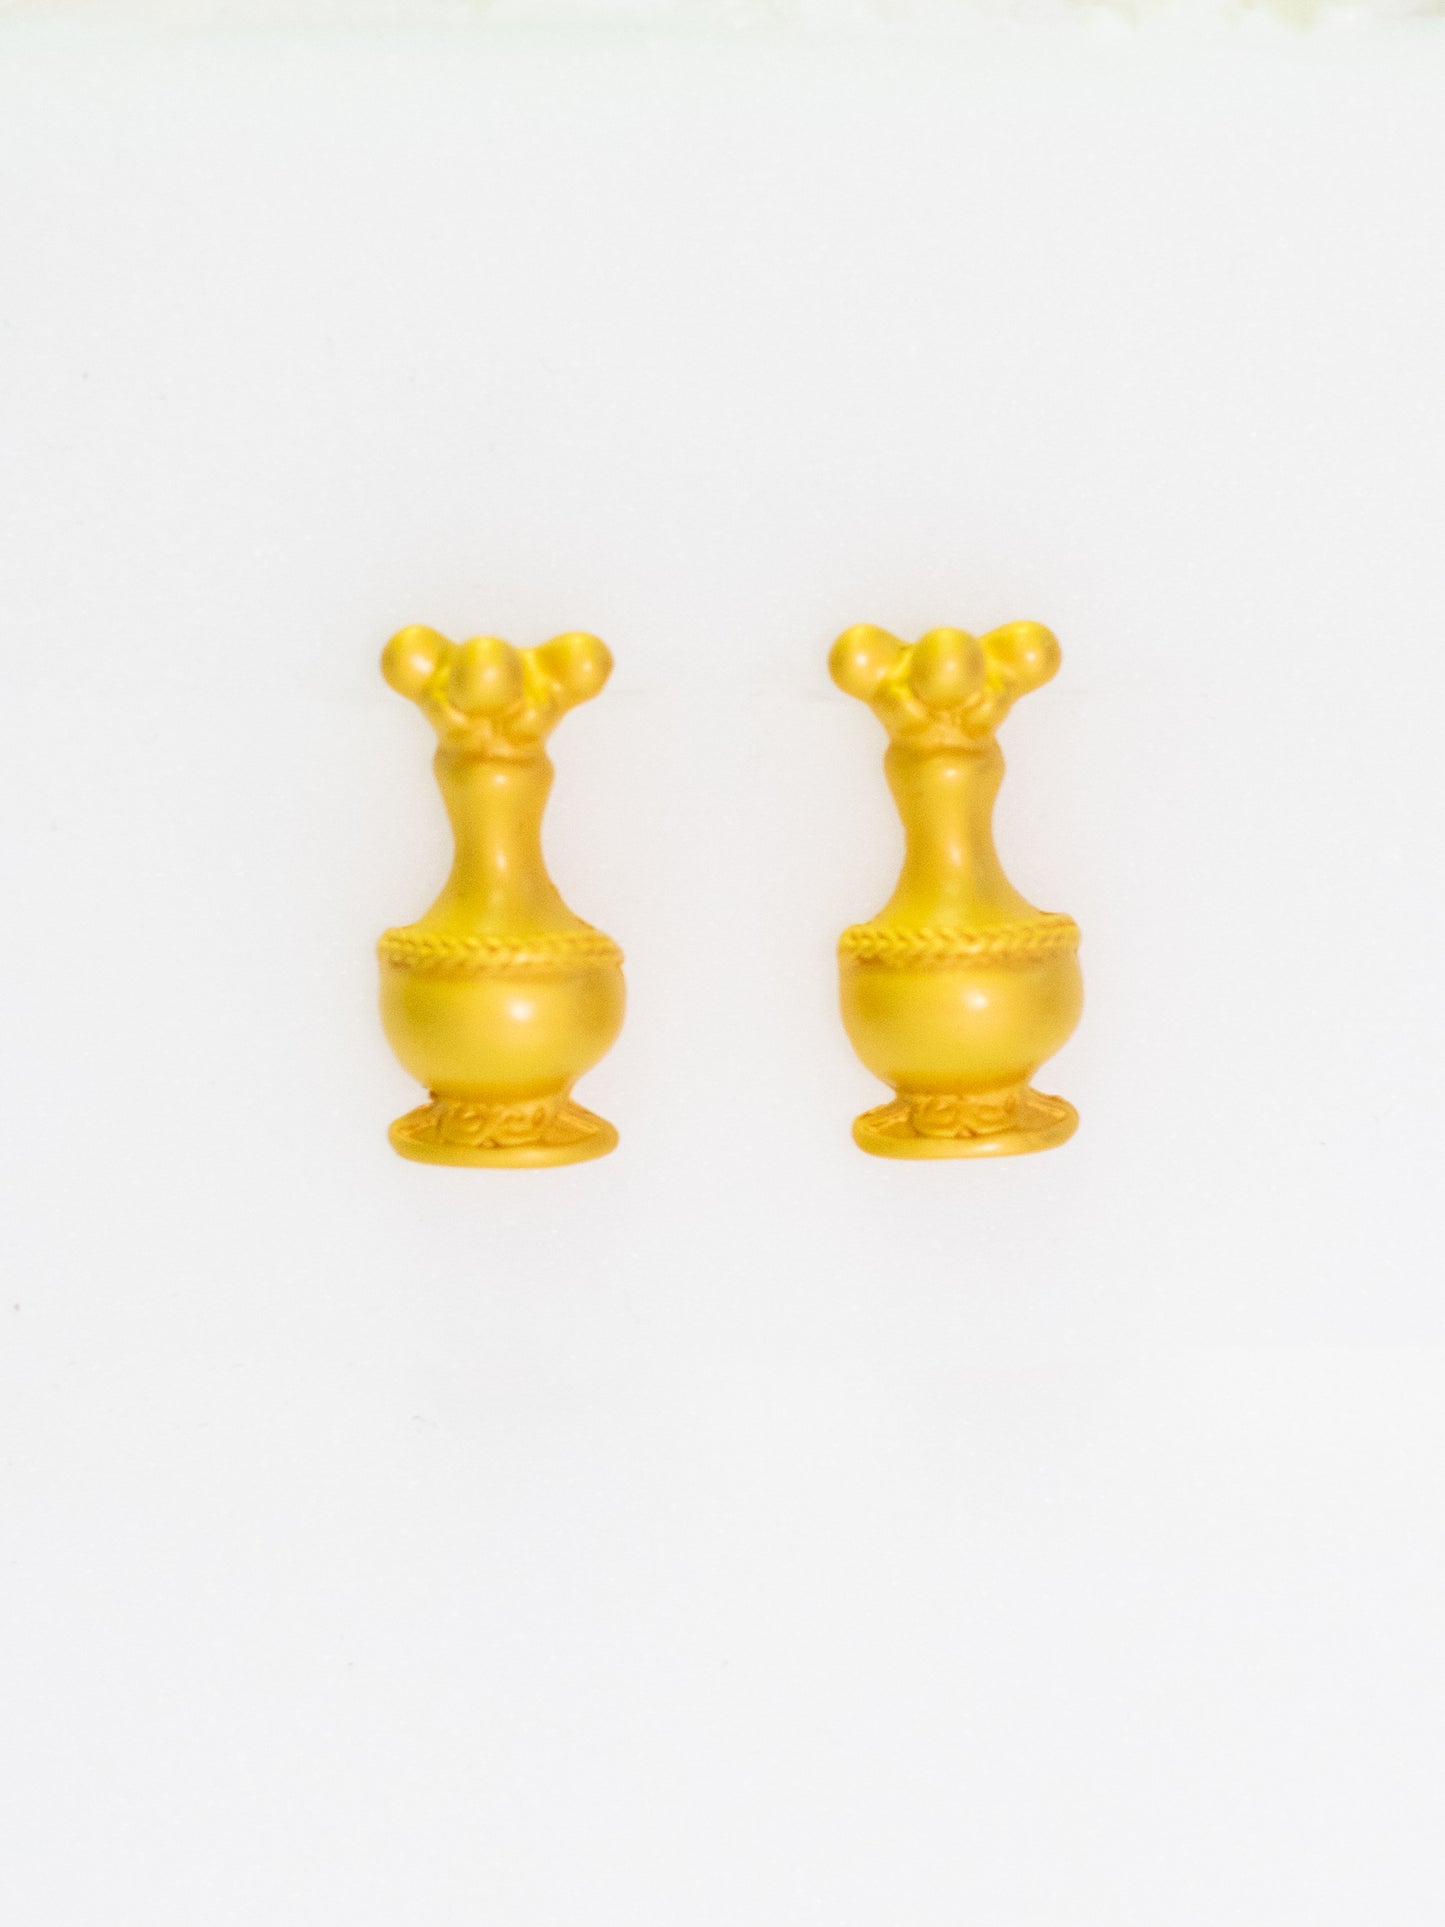 24K Gold Plated Pre-Columbian Muisca Poporo Quimbaya Earrings.